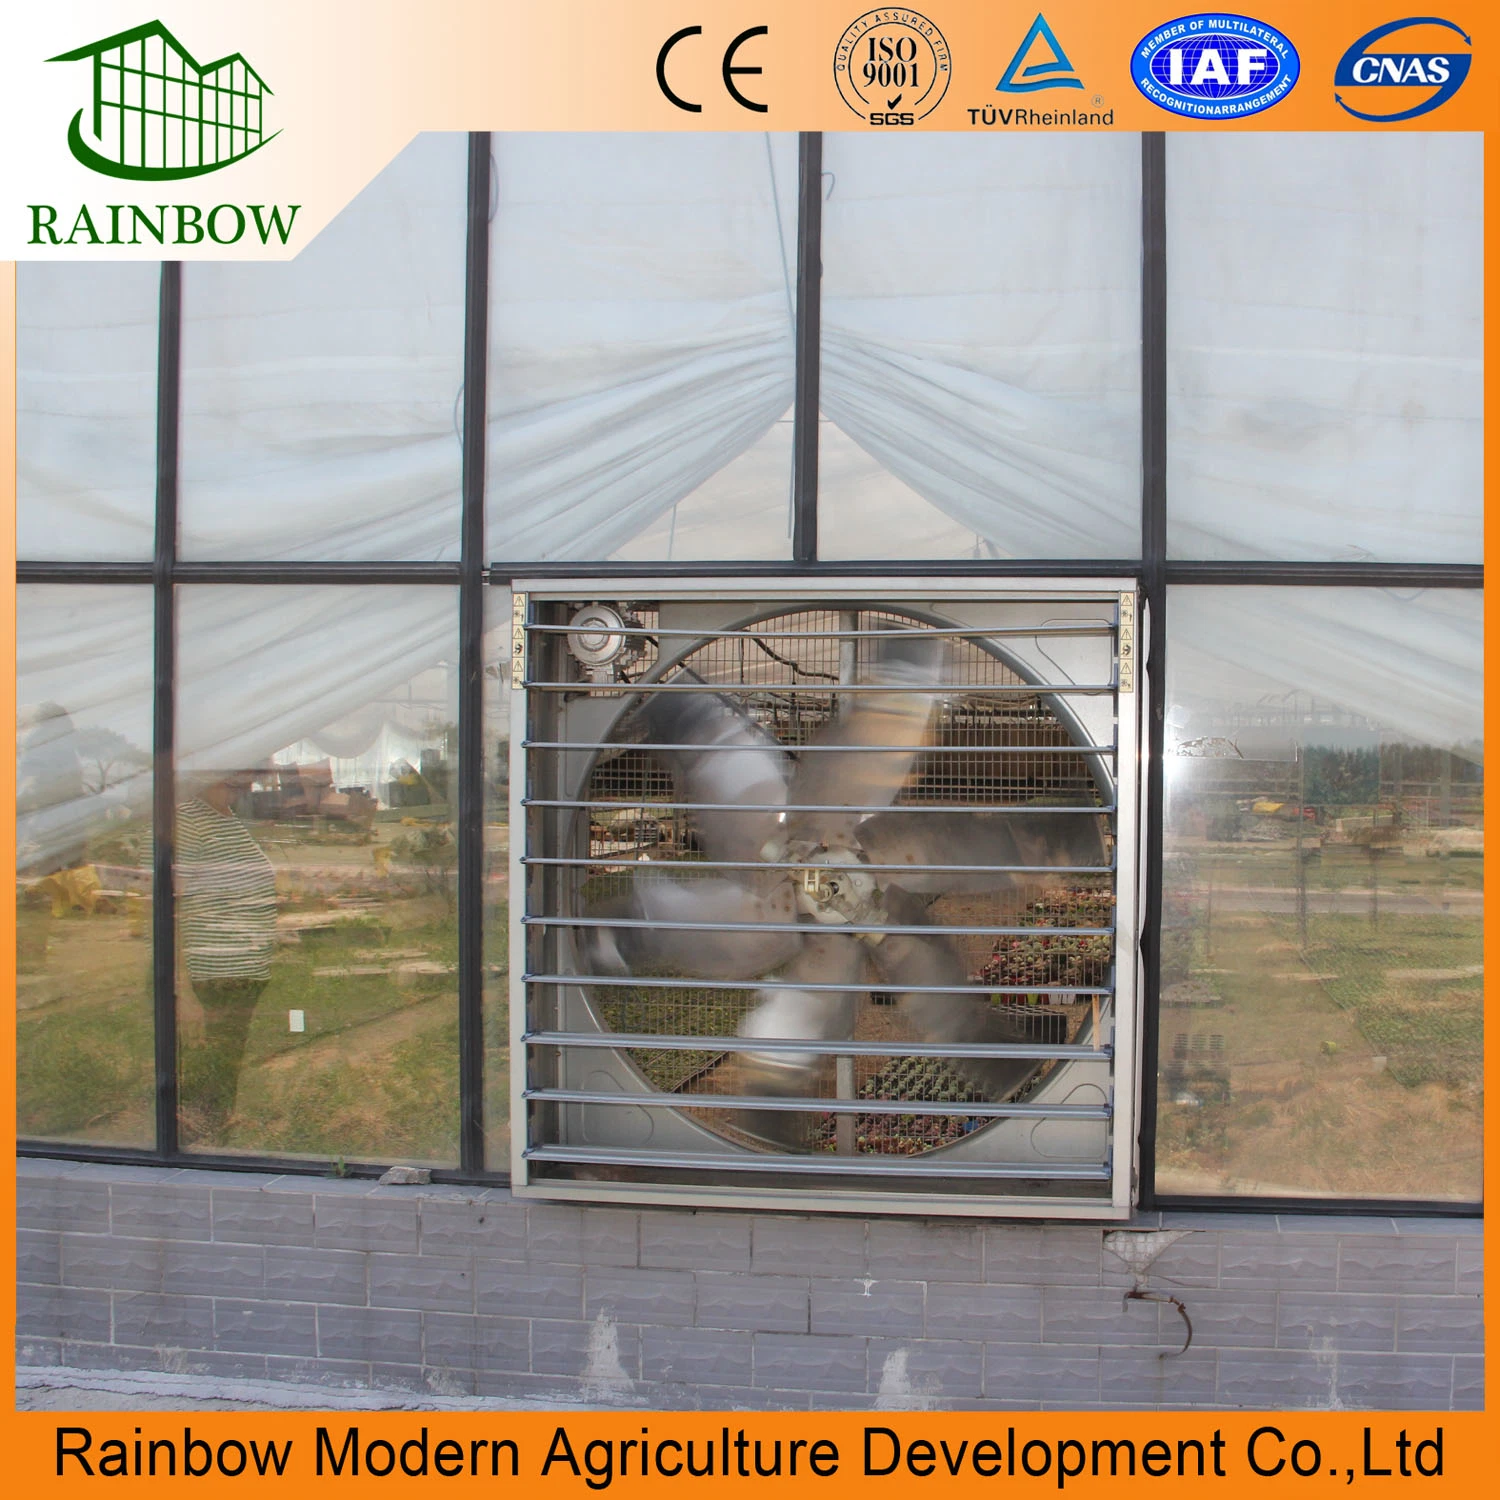 Significantly Effective Wall Mounted Exhausted Cooling Fan for Greenhouse/ Poultry